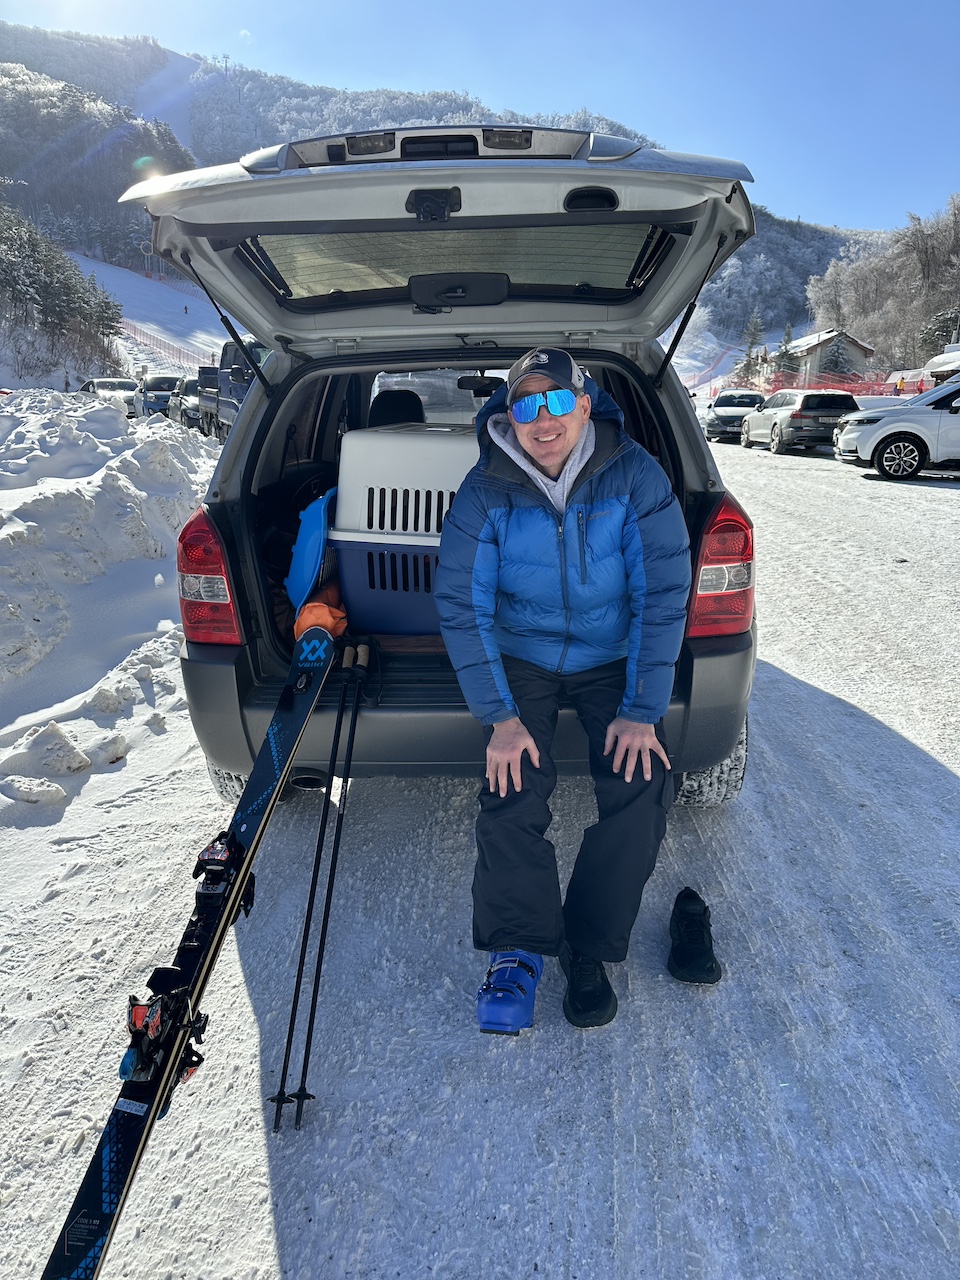 Owning a car in South Korea made ski trips a lot easier